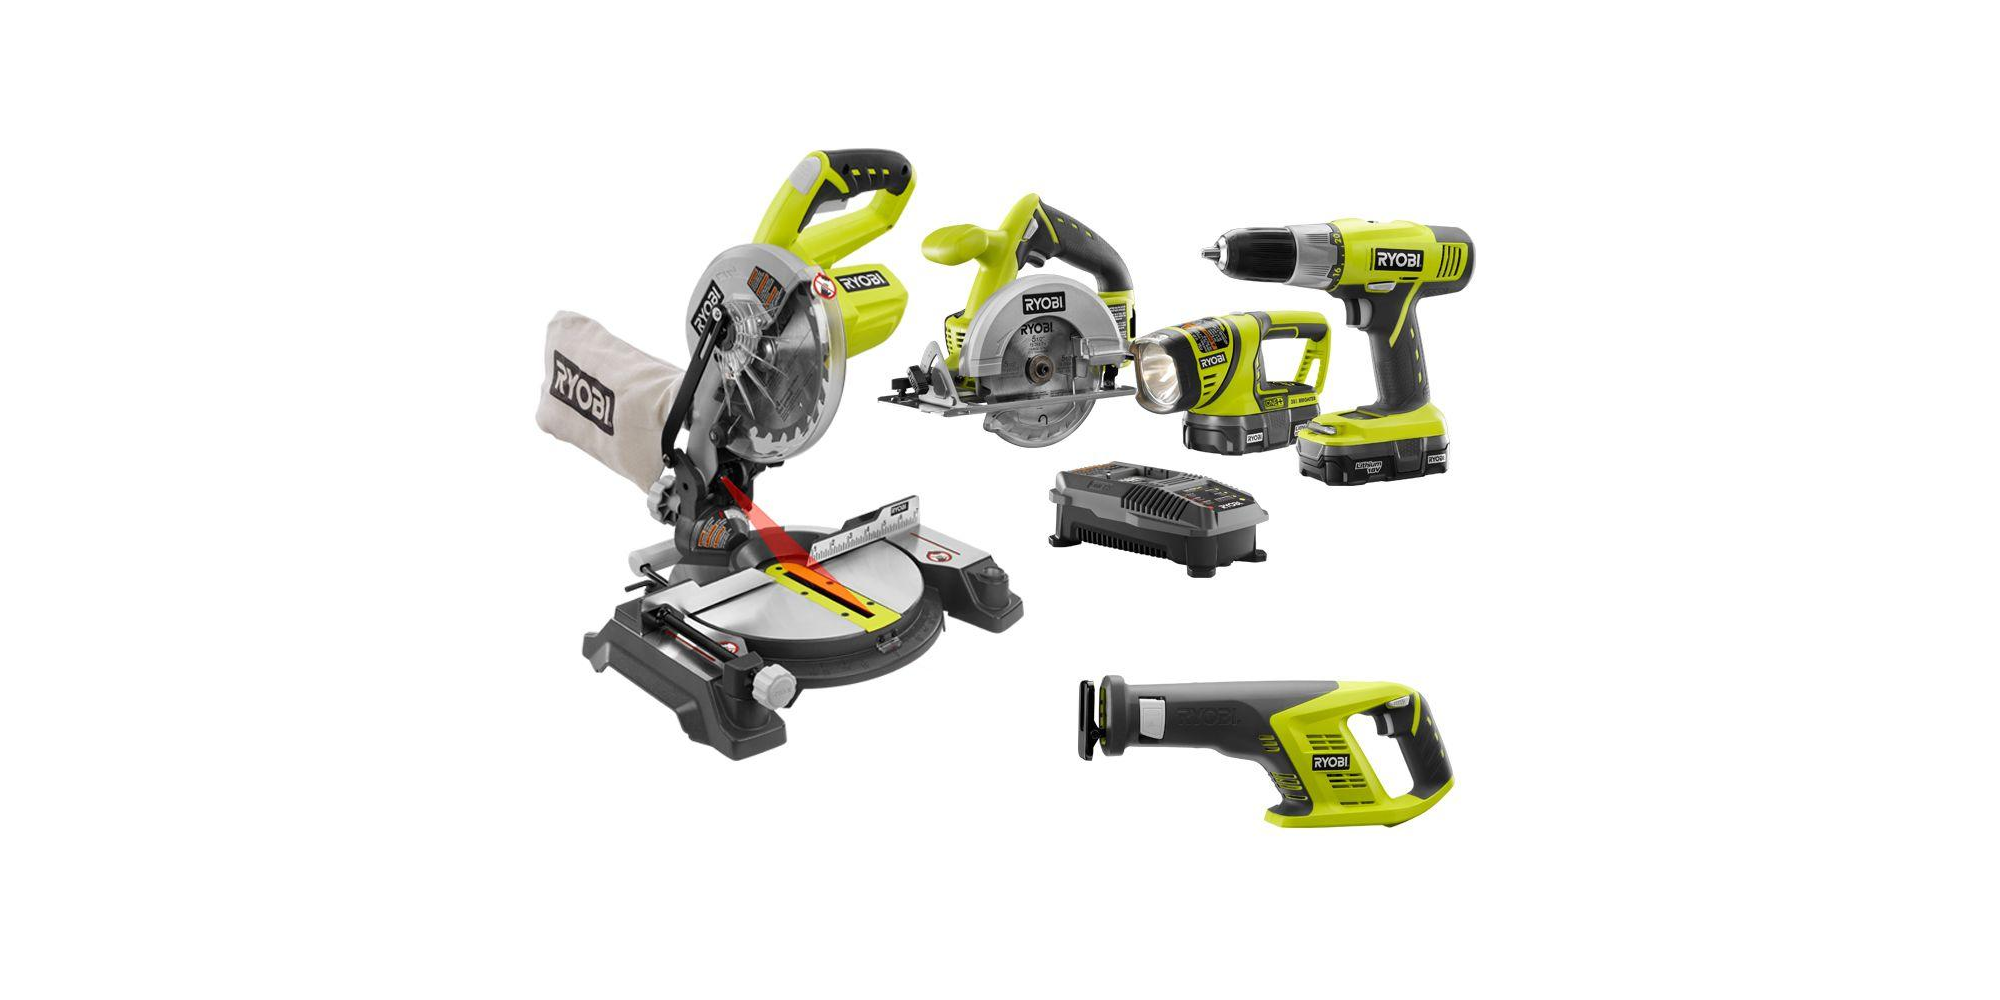  ONE+ 18-Volt Lithium-Ion Cordless 5-tool Combo Kit with Miter Saw .